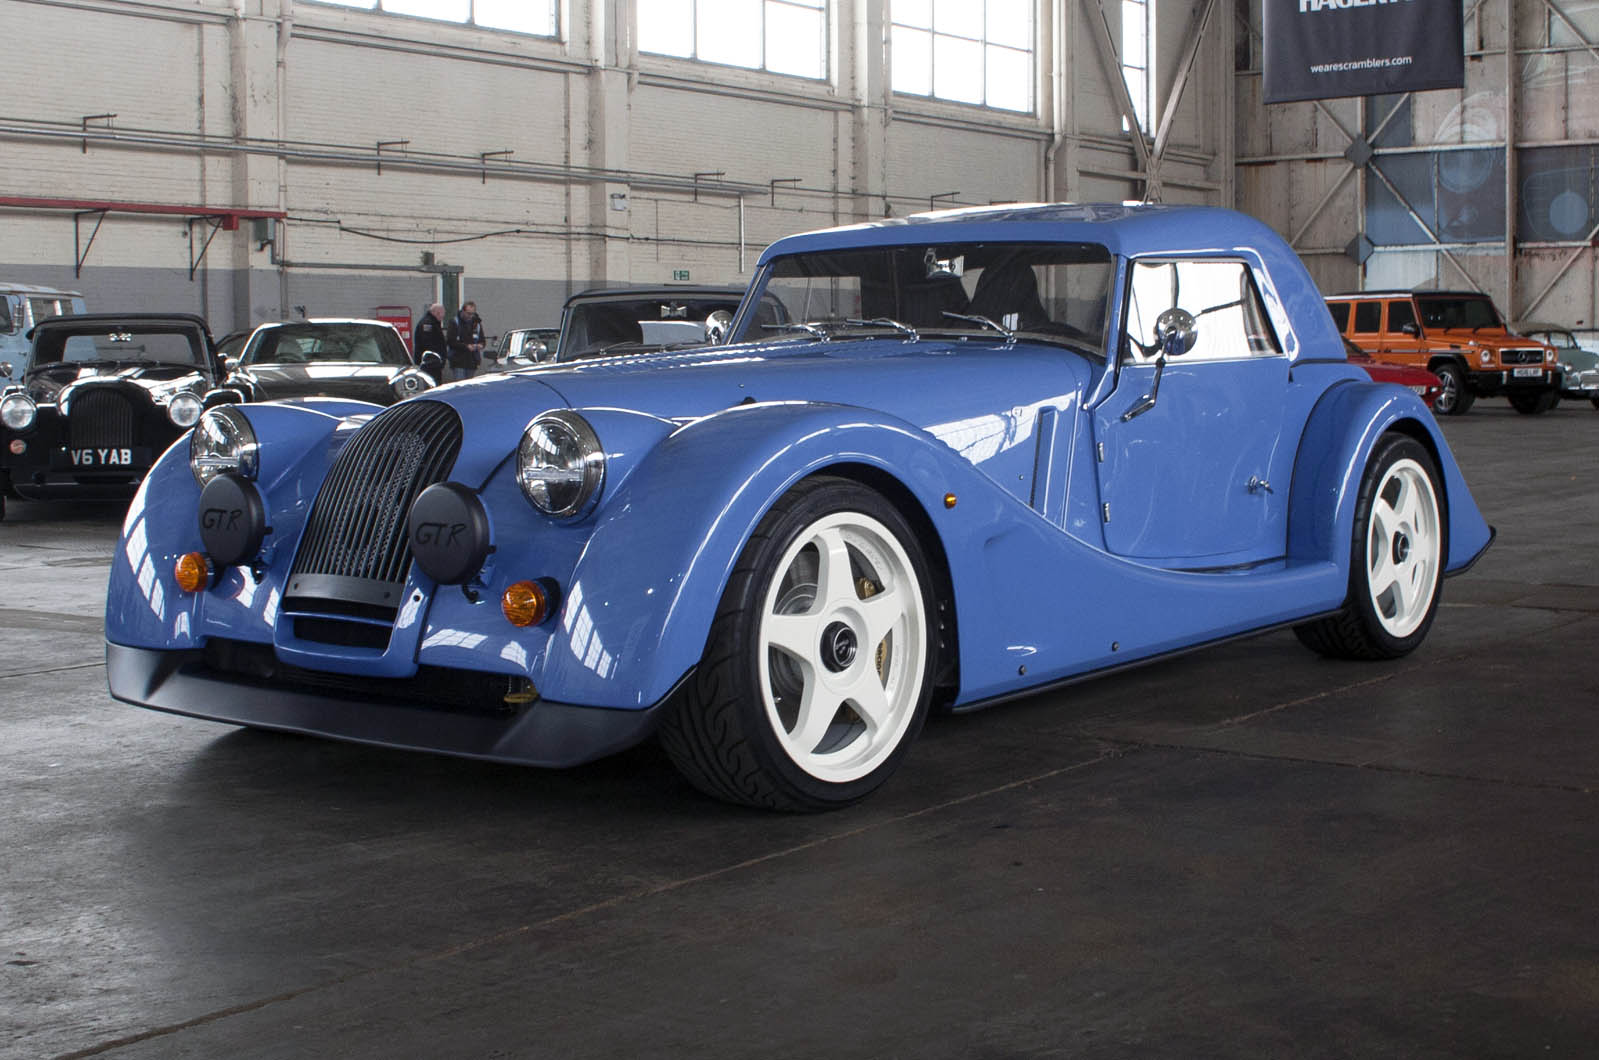 Morgan Reviving Plus 8 With New Racing-Inspired GTR Limited To A